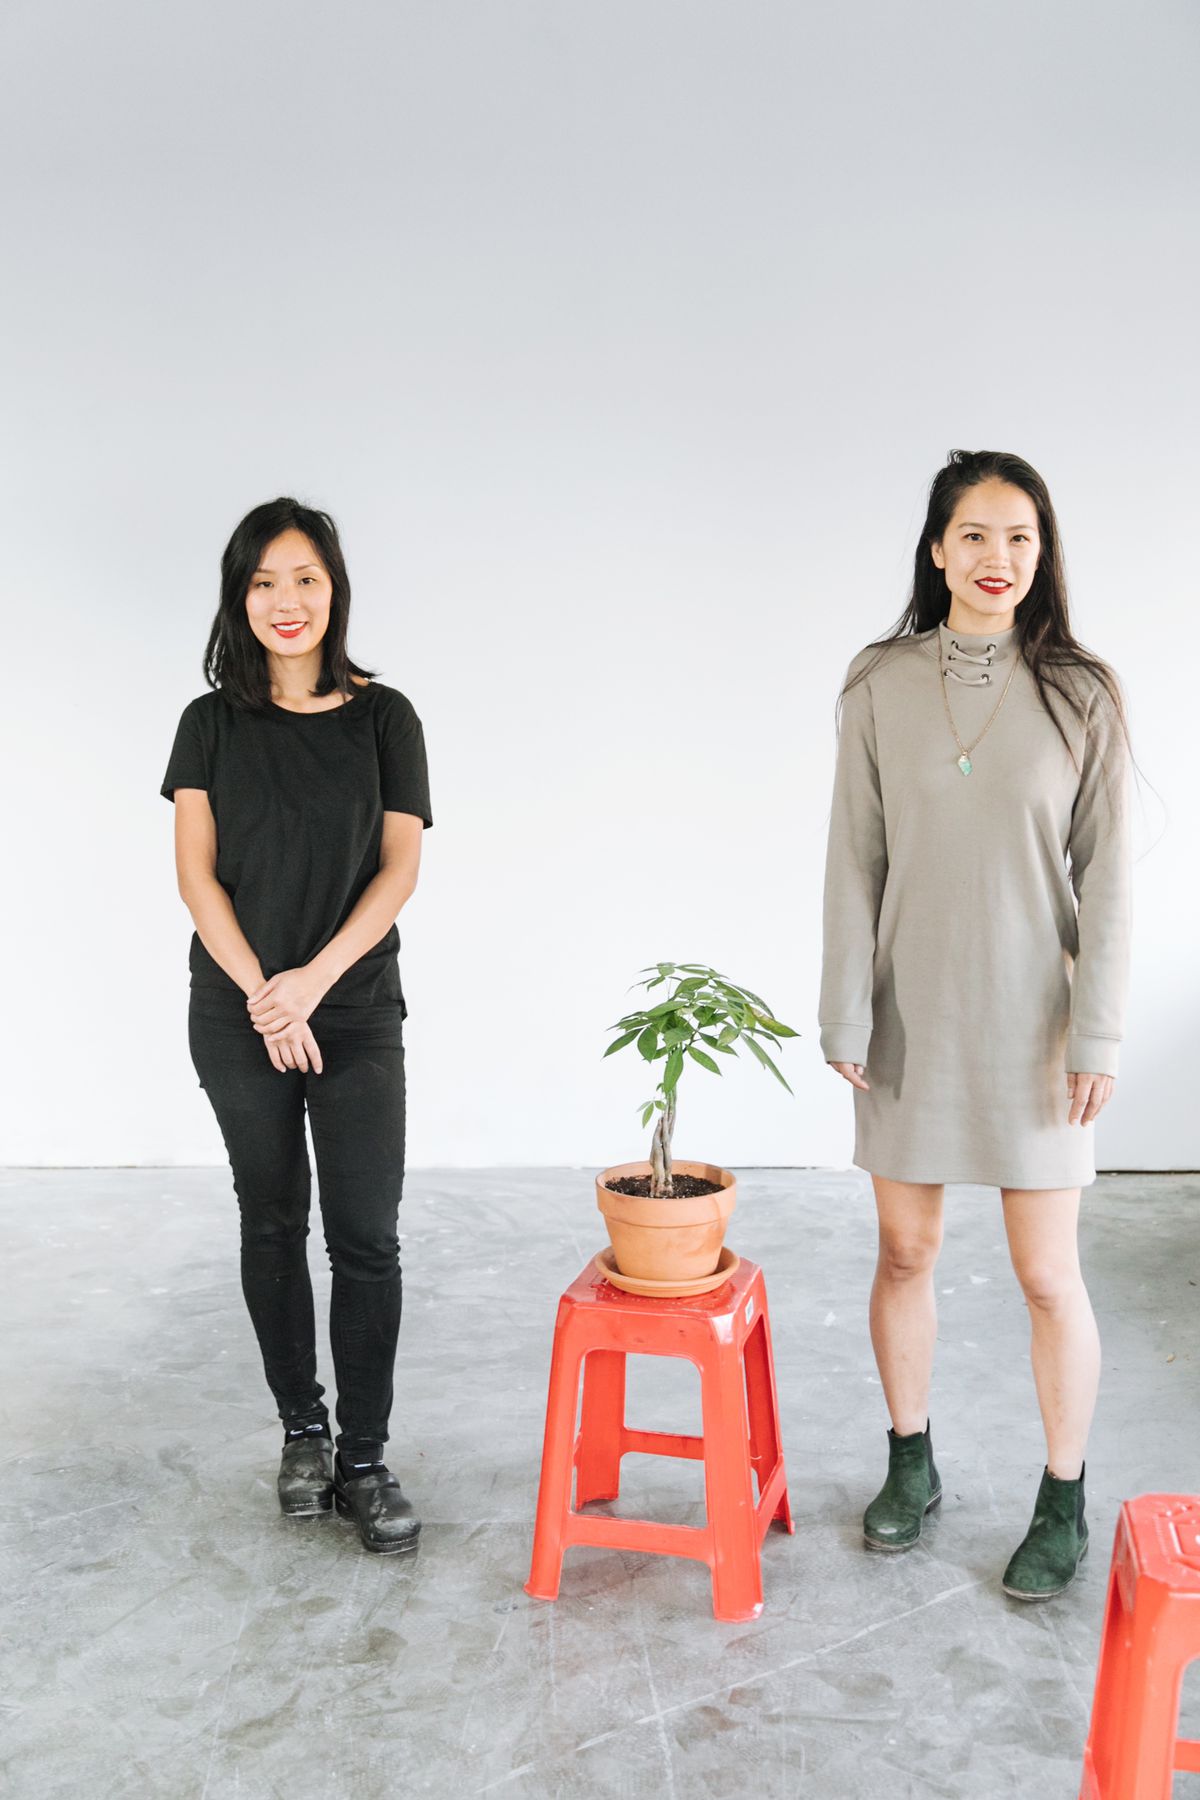 Valerie Luu (left) and Katie Kwan, with a potted plant on top of a red stool